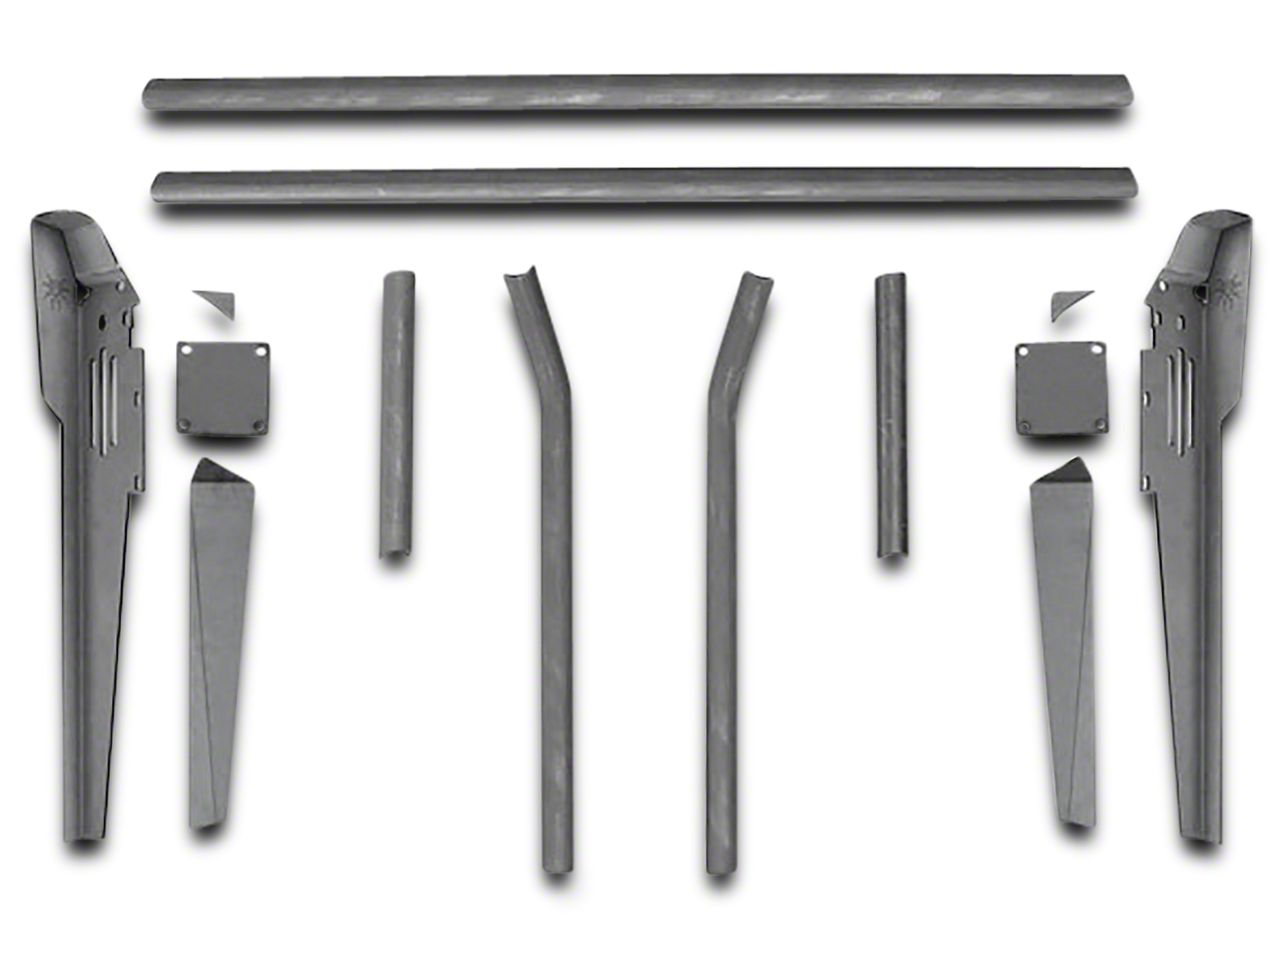 Bronco Roll Bars & Cages 1992-1996